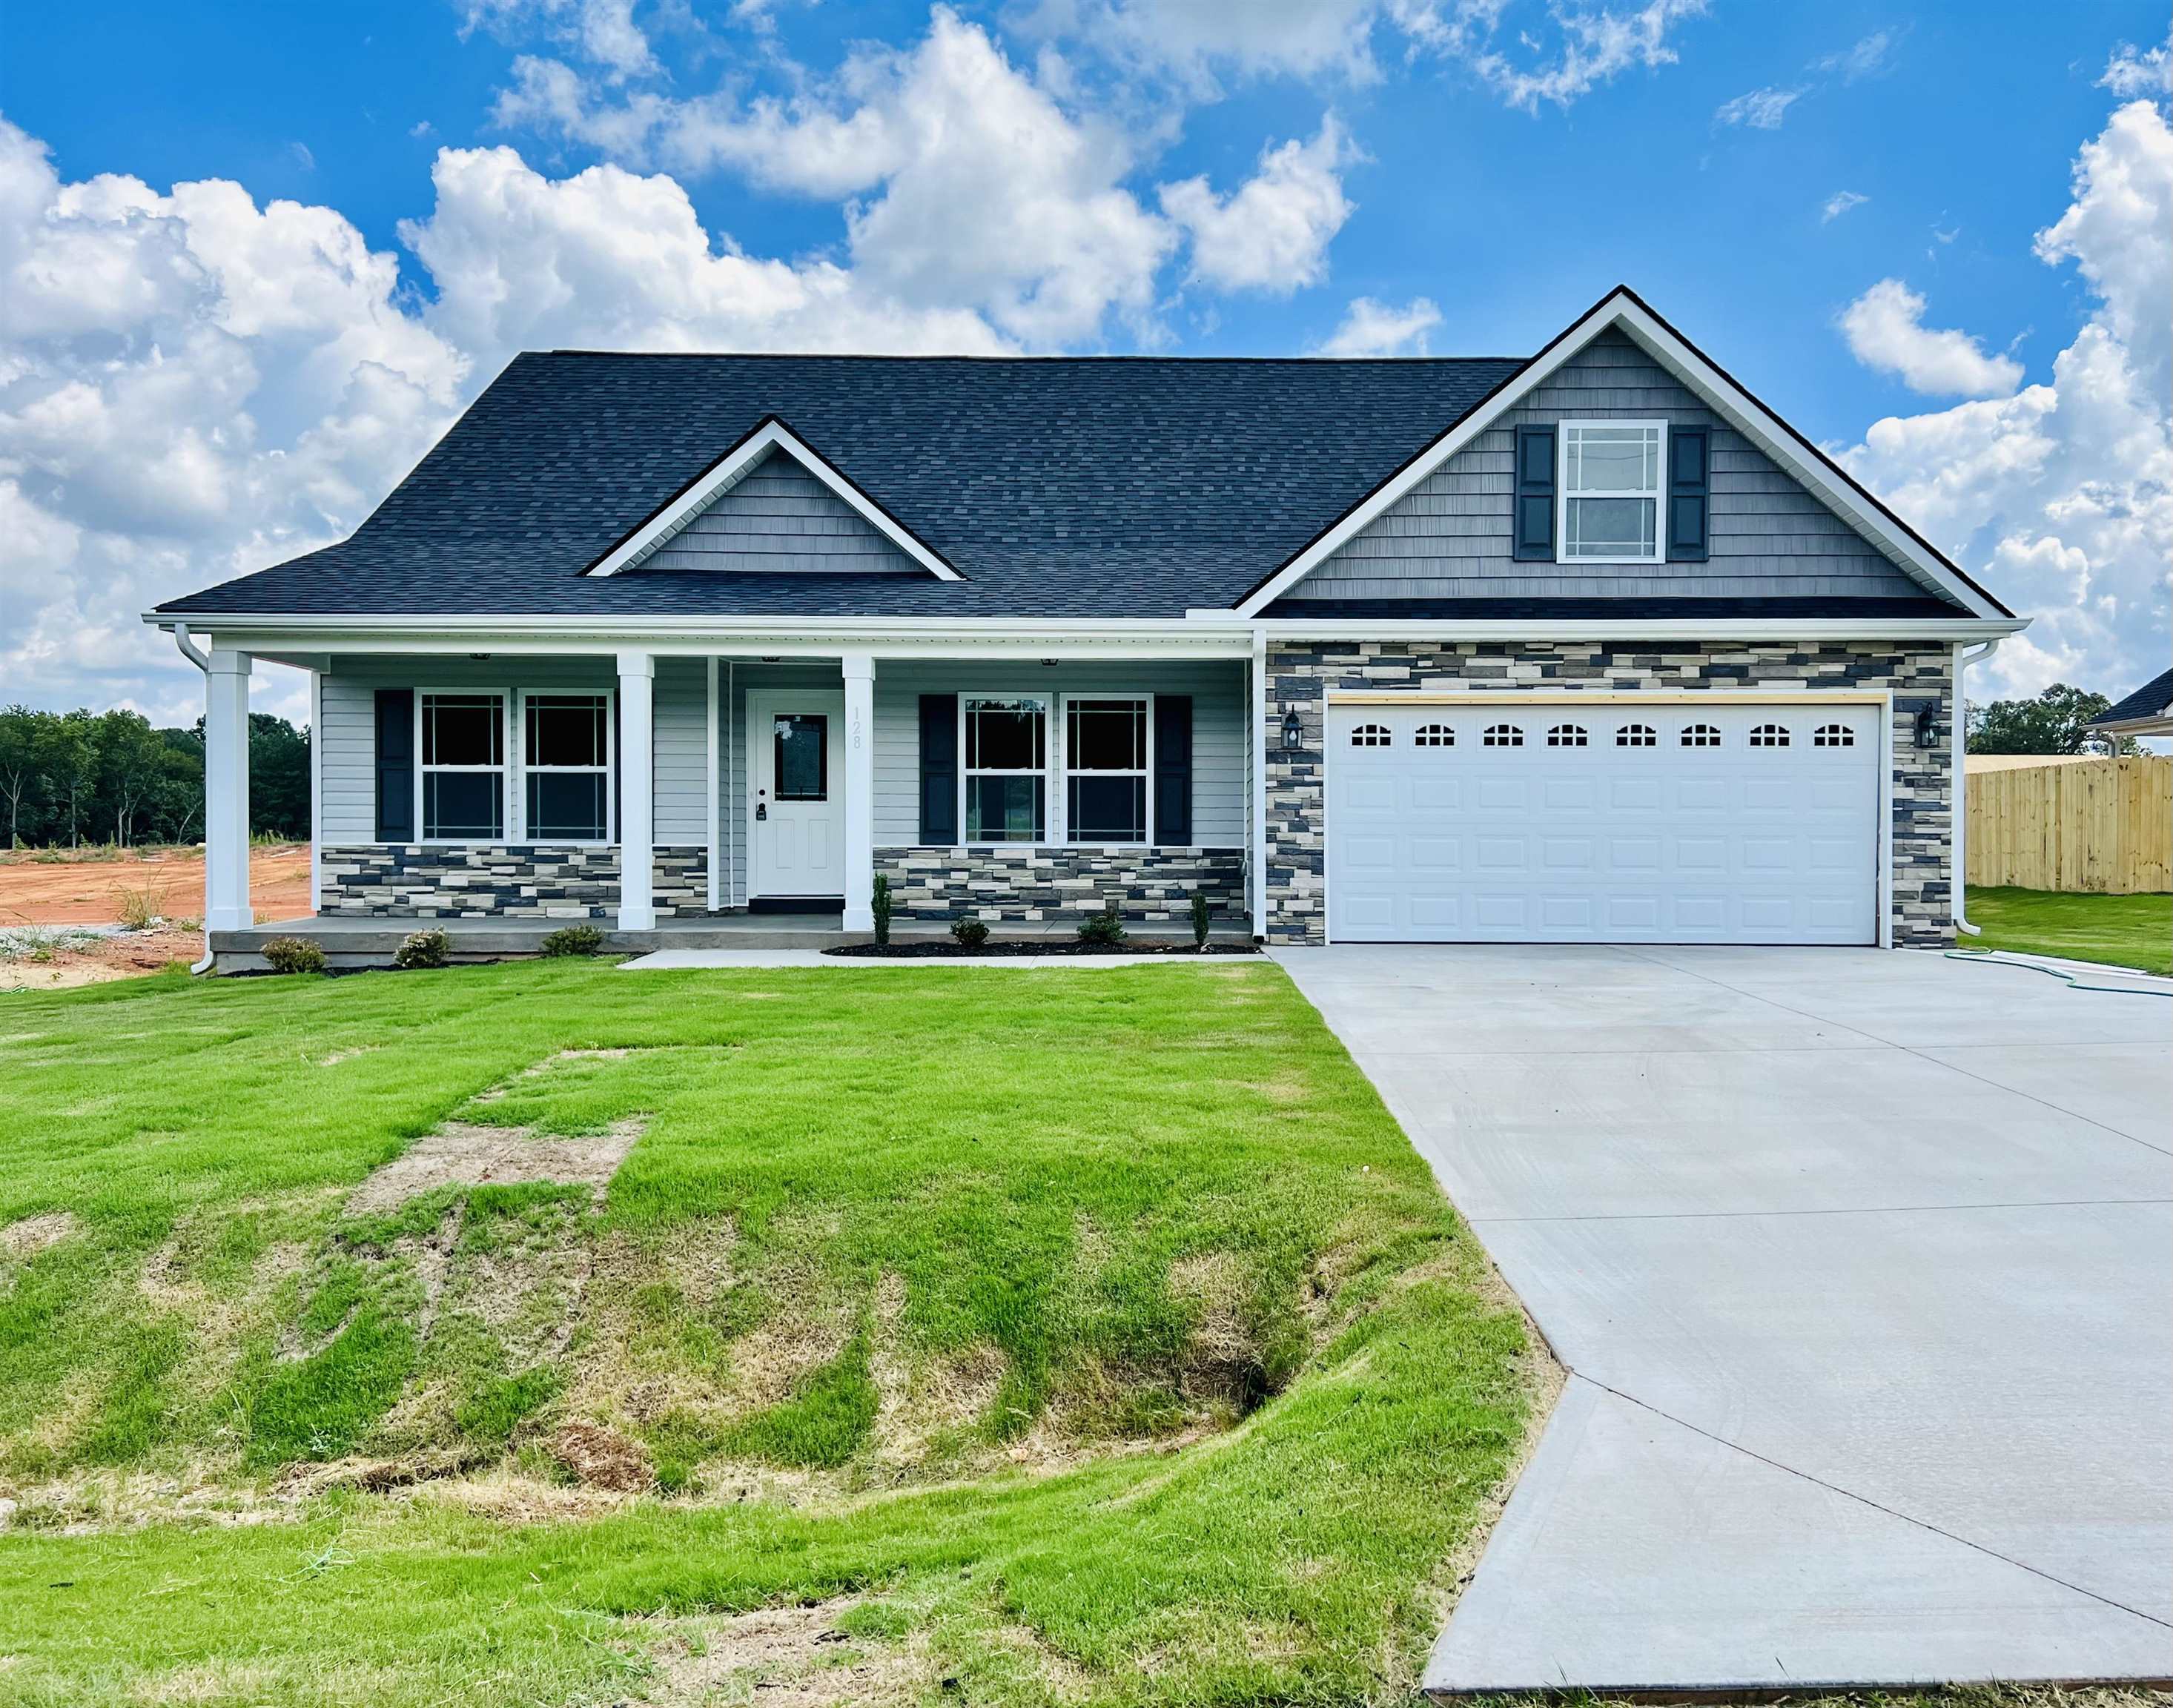 Welcome to Double Creek! Nestled in the heart of Grassy Pond and just around the corner from the Cherokee National Golf Course, this subdivision sports large lots and premier floor plans in a quiet, country setting.